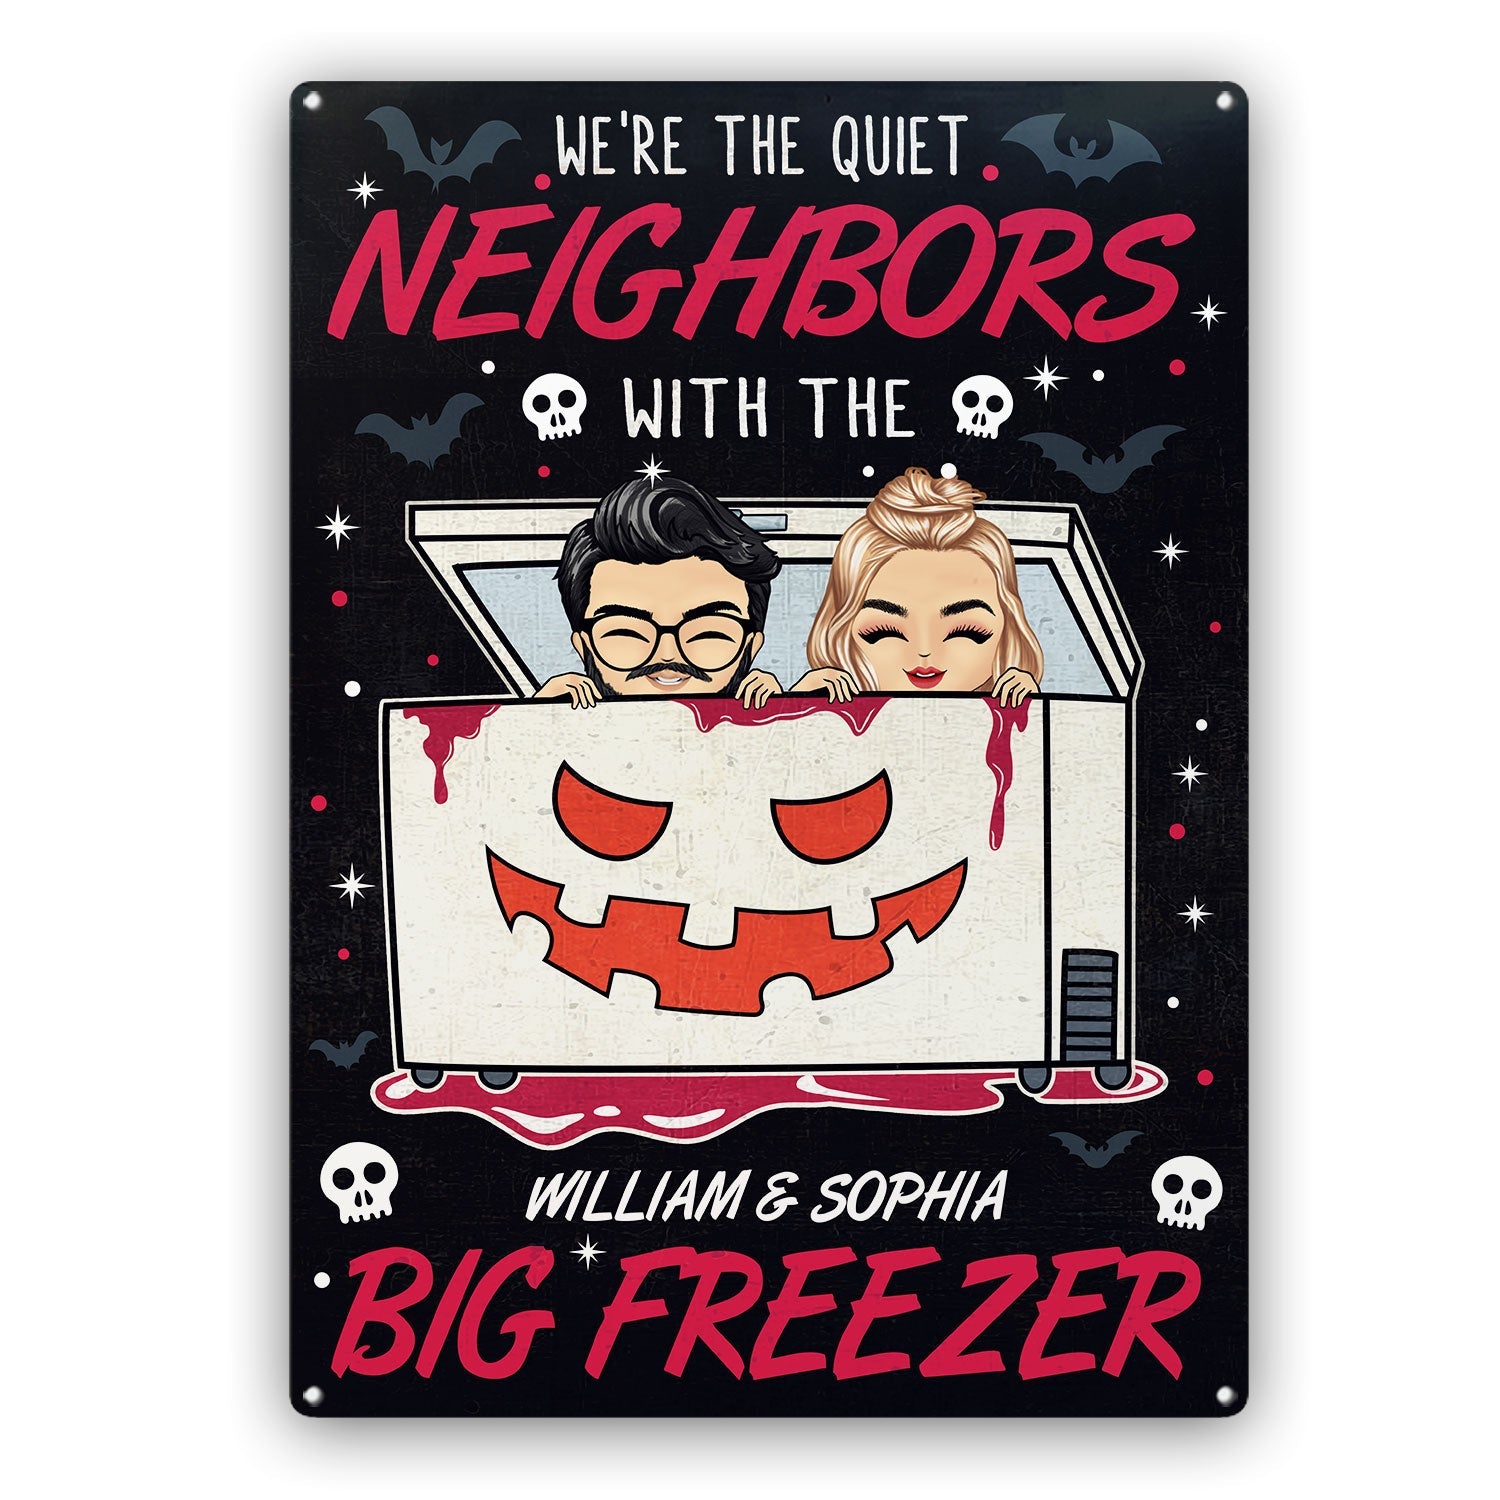 We're The Quiet Neighbors With The Big Freezer - Backyard Sign, Halloween Outdoor Home Decor, Housewarming Gift For Couples, Husband, Wife - Personalized Classic Metal Signs